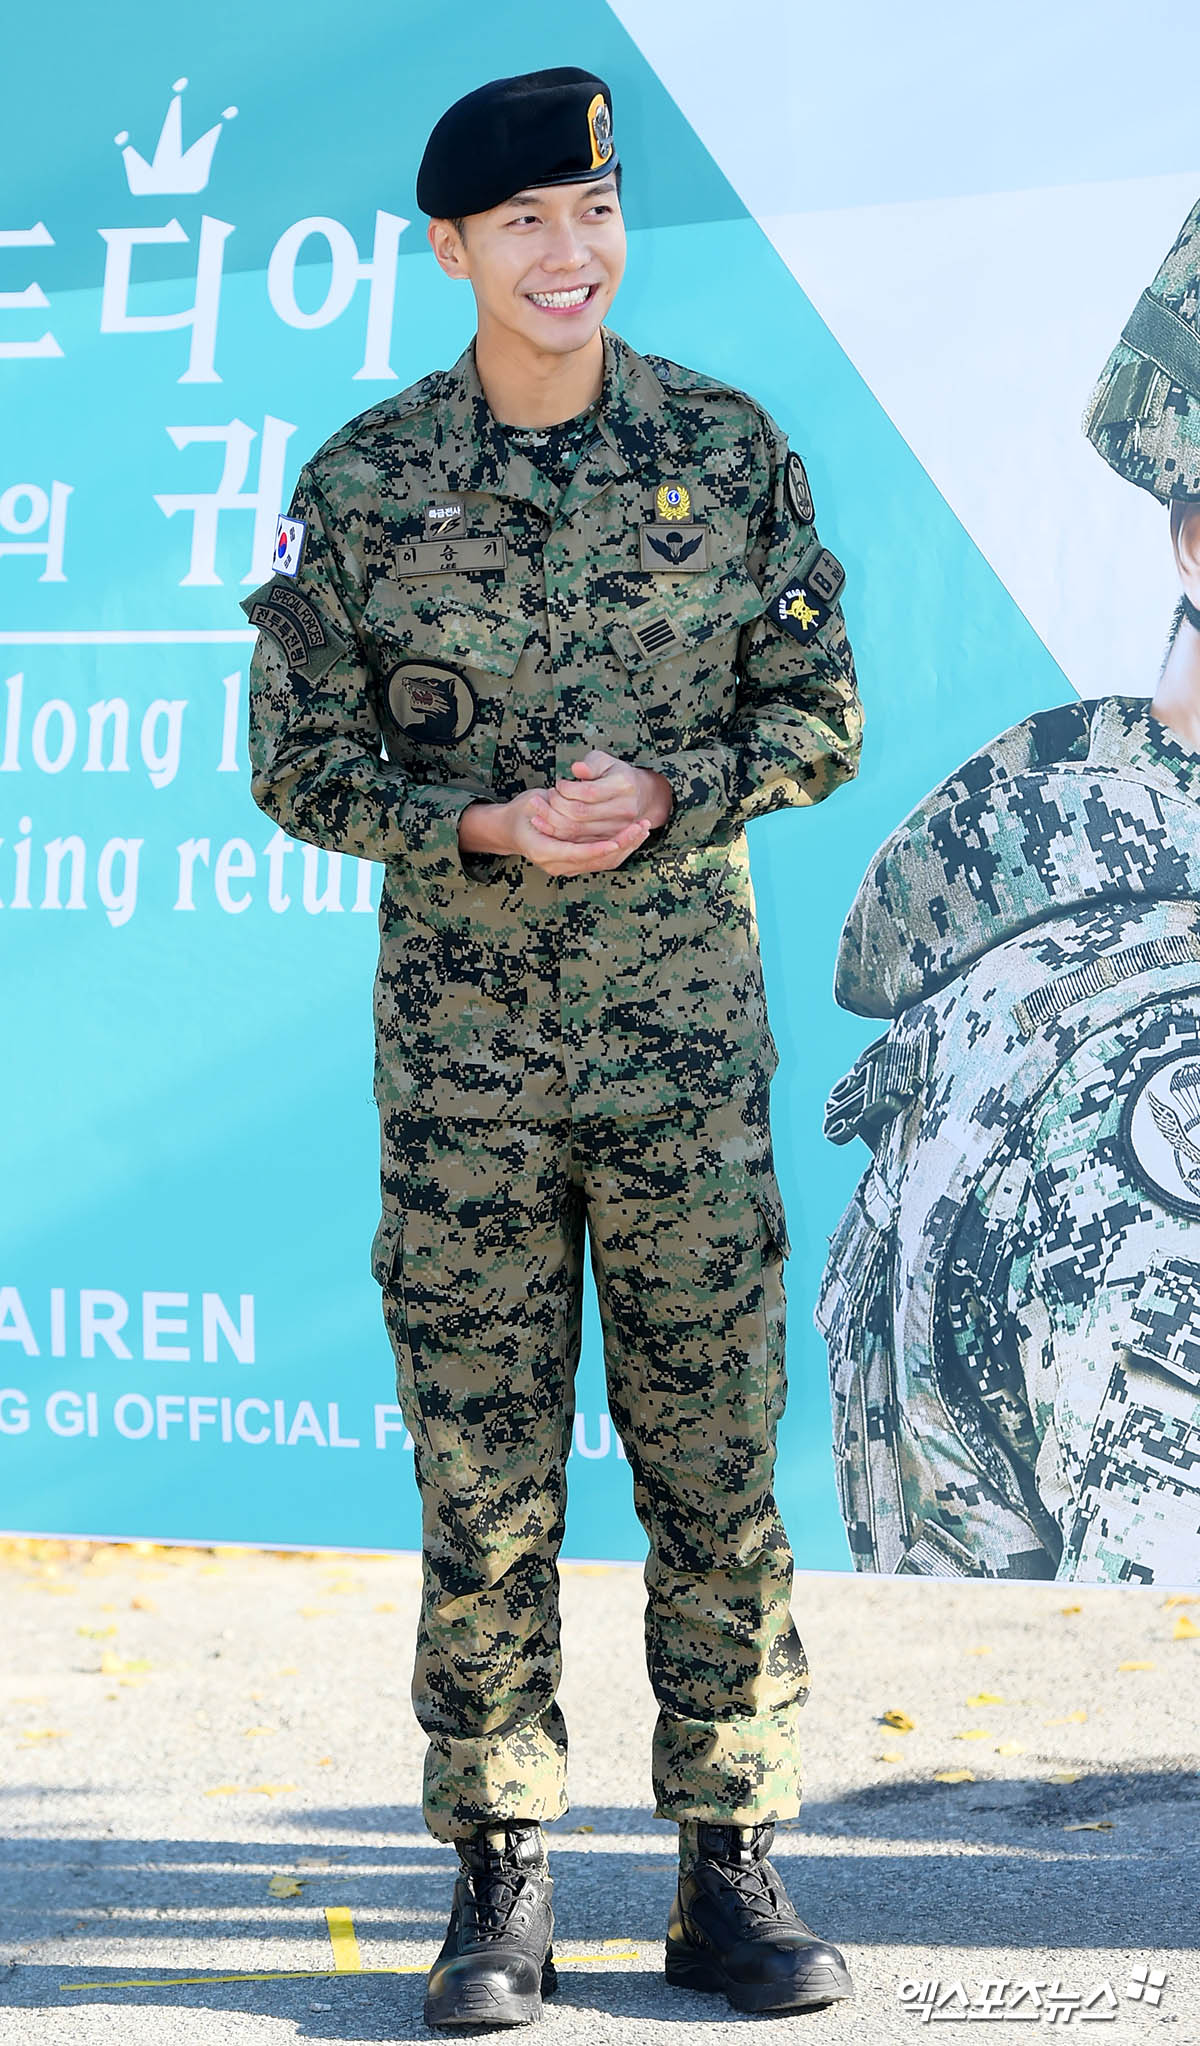 In this series, I look back on Nine Years Ago Today with entertainment and sports sites.2017On October 31, singer and actor Lee Seung-gi, who had been serving for 21 months in the 13th Airborne Special Forces Brigade Black Pyo Unit of the Army Special Warfare Command in Chungbuk Jeonpyeong-gun,On this day, there were about 400 fans from home and abroad gathered to celebrate the Discharge of Lee Seung-gi and the reporters gathered early.Lee Seung-gi, who appeared in the cheers of fans at around 9 am, gave a few impressions of the discharge greetings to reporters and fans in front of the front gate of the unit.Lee Seung-gi, along with the salute Unity, said in his discharge testimony, I did not sleep well because I felt sorry for the time to organize with the troops I had been with and the time to greet, and it felt short.Lee Seung-gi, who said frankly that it has not been too long since I left 100 days of Discharge, said, And the last 48 hours did not go before Discharge.On the other hand, I thought that many fans would like to come to the Discharge site, and I am grateful that you prepared various things including plan cards in cold weather from dawn.Ive had a lot of trouble and Im really grateful.Especially when the Ry entertainers who joined the army at the same time reported the Discharge news, it seemed as late as the news of the toxic Lee Seung-gis Discharge, and even the military pile came out with a joke.Lee Seung-gi said, I have a lot of words from Lee Seung-gi pile to Do not discharge, and I would like to thank you for waiting and prepare you hard to meet your expectations.After Discharge, Lee Seung-gi chose tvN Hwa Yugi as his return, and last year he was actively performing on SBS Bae Ga Bond.Also, SBS All The Butlers, Little Forest, Mnet Produce 48, Netflix Bum Eun is you!He has appeared in various programs such as Season 2 and Together, and has been in full swing in entertainment.Ive been a dignified piece of paper.Smile on the face.Fants to meet in 21 months.Ive been ordered to Discharge.The person who became more prominent after Discharge.A cute smile still exists.